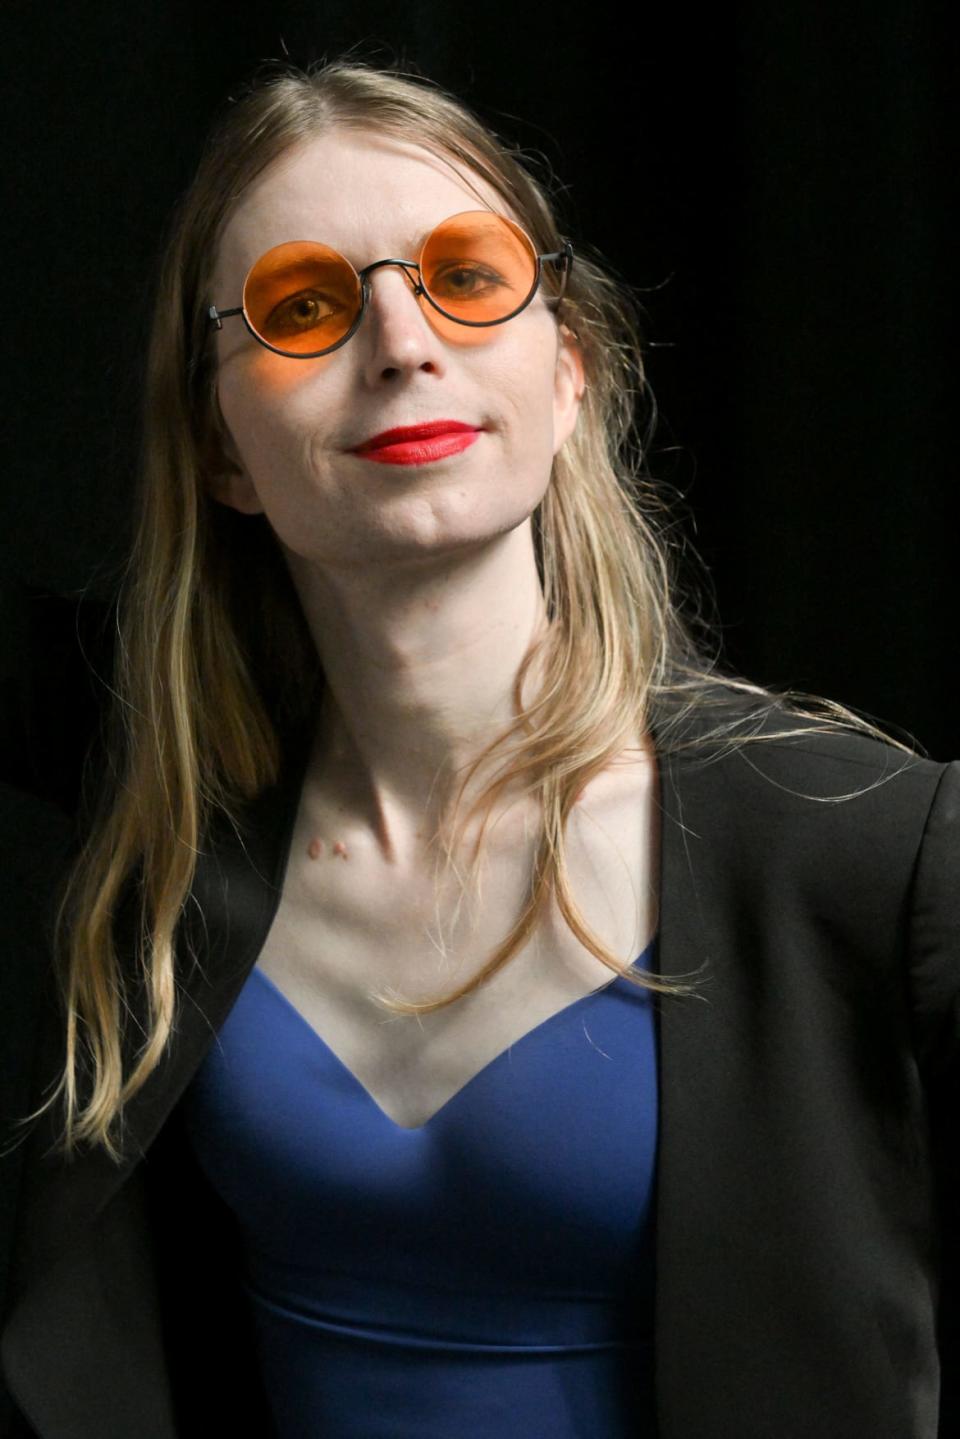 <div class="inline-image__caption"><p>Chelsea Manning poses on May 24, 2022, in Brussels, Belgium.</p></div> <div class="inline-image__credit">Dirk Waem/AFP/Getty</div>